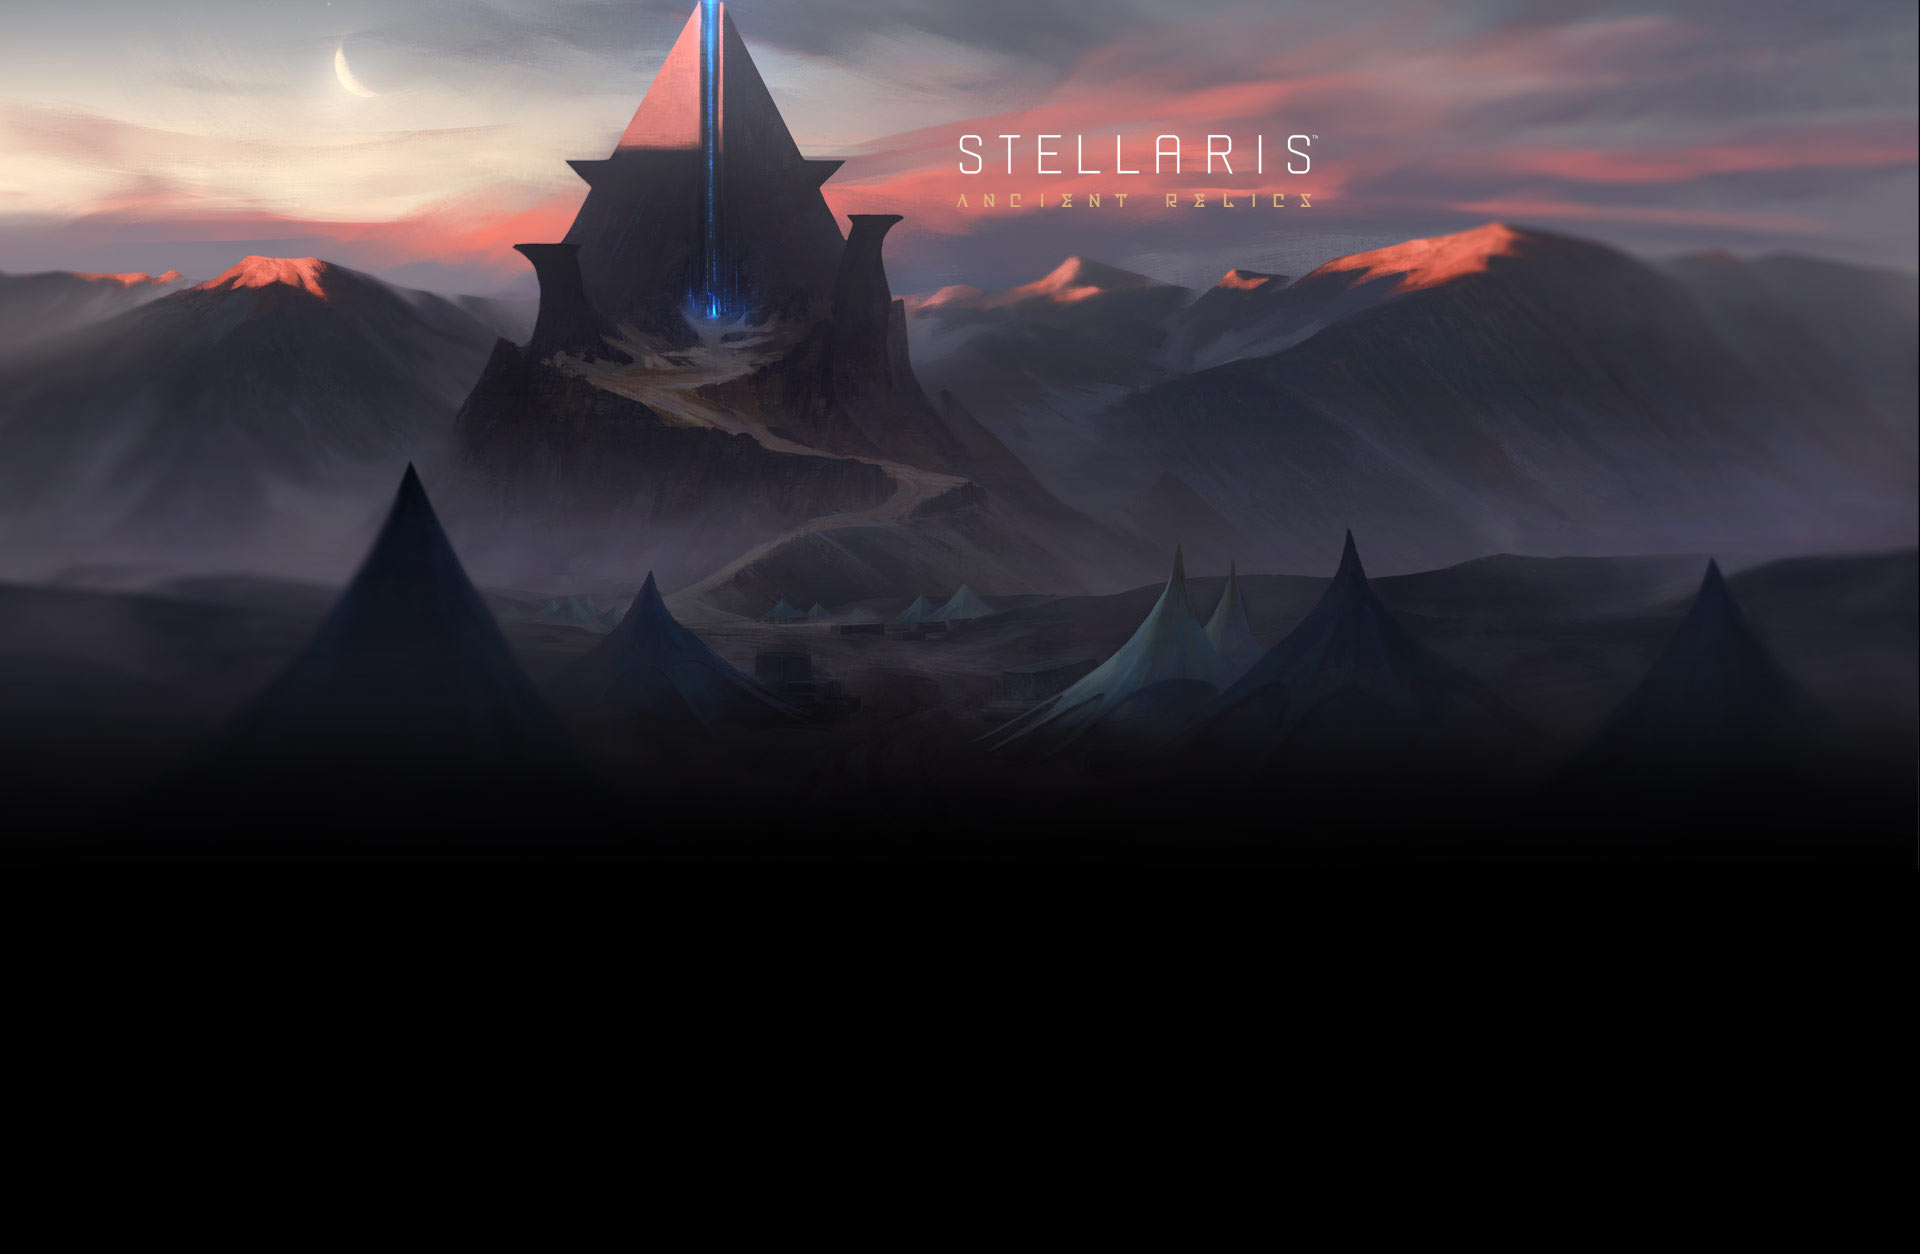 Ancient Relics Story Pack - Stellaris , HD Wallpaper & Backgrounds